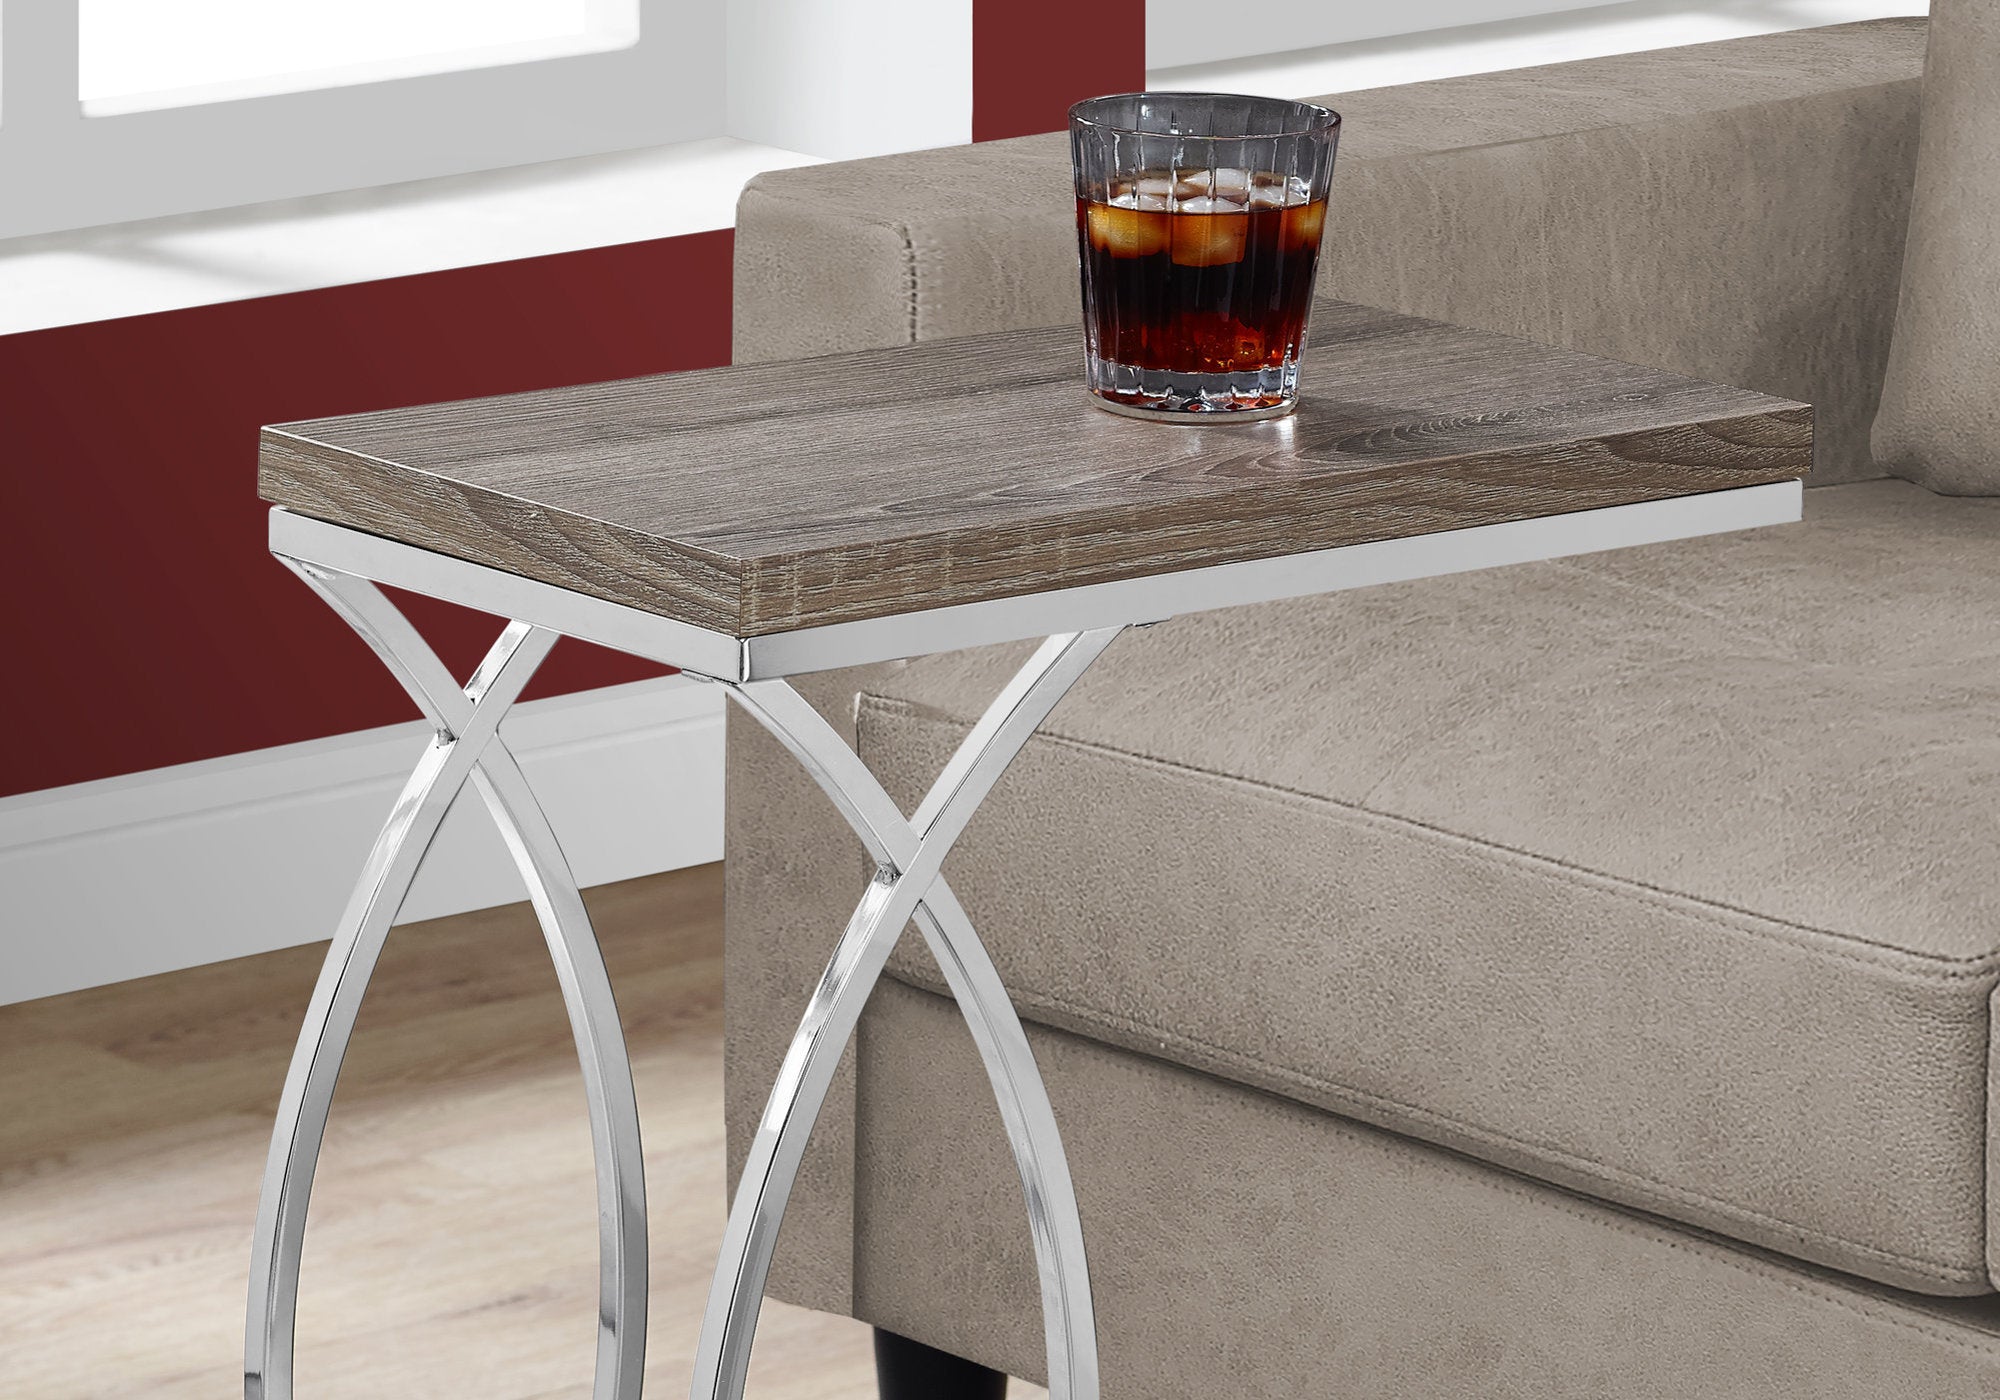 MN-623186    Accent Table, C-Shaped, End, Side, Snack, Living Room, Bedroom, Metal Legs, Laminate, Dark Taupe, Chrome, Contemporary, Modern